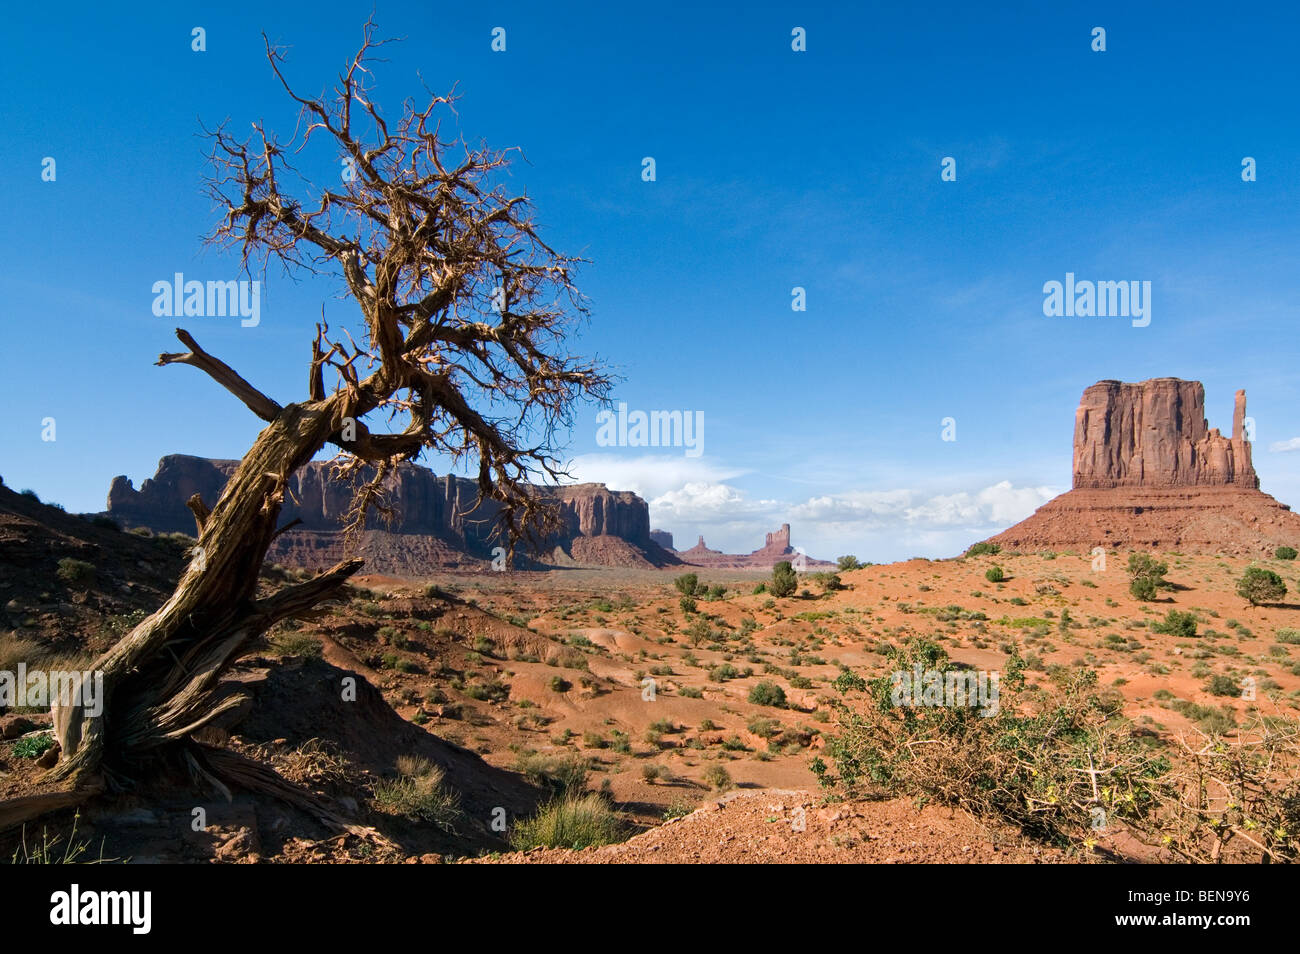 Arizona cypress (Cupressus arizonica) and the Mittens, sandstone buttes at the Monument Valley Navajo Tribal Park, Arizona, US Stock Photo